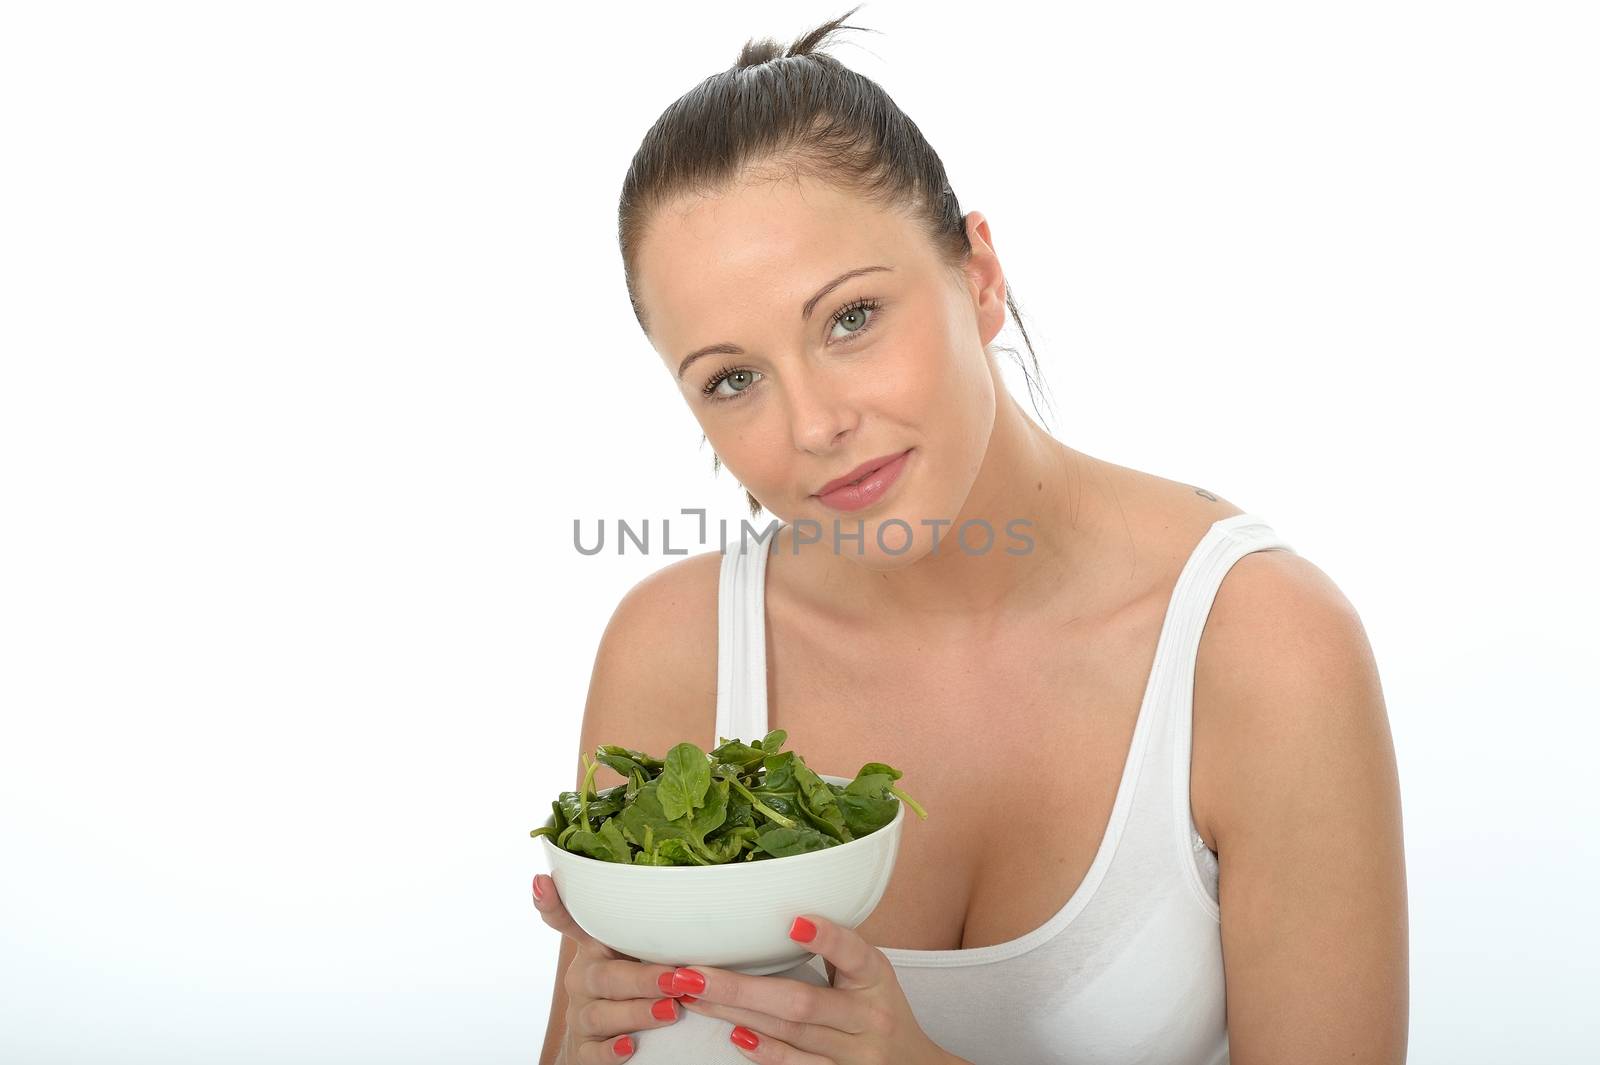 Healthy Young Woman Holding a Bowl of Spinach by Whiteboxmedia